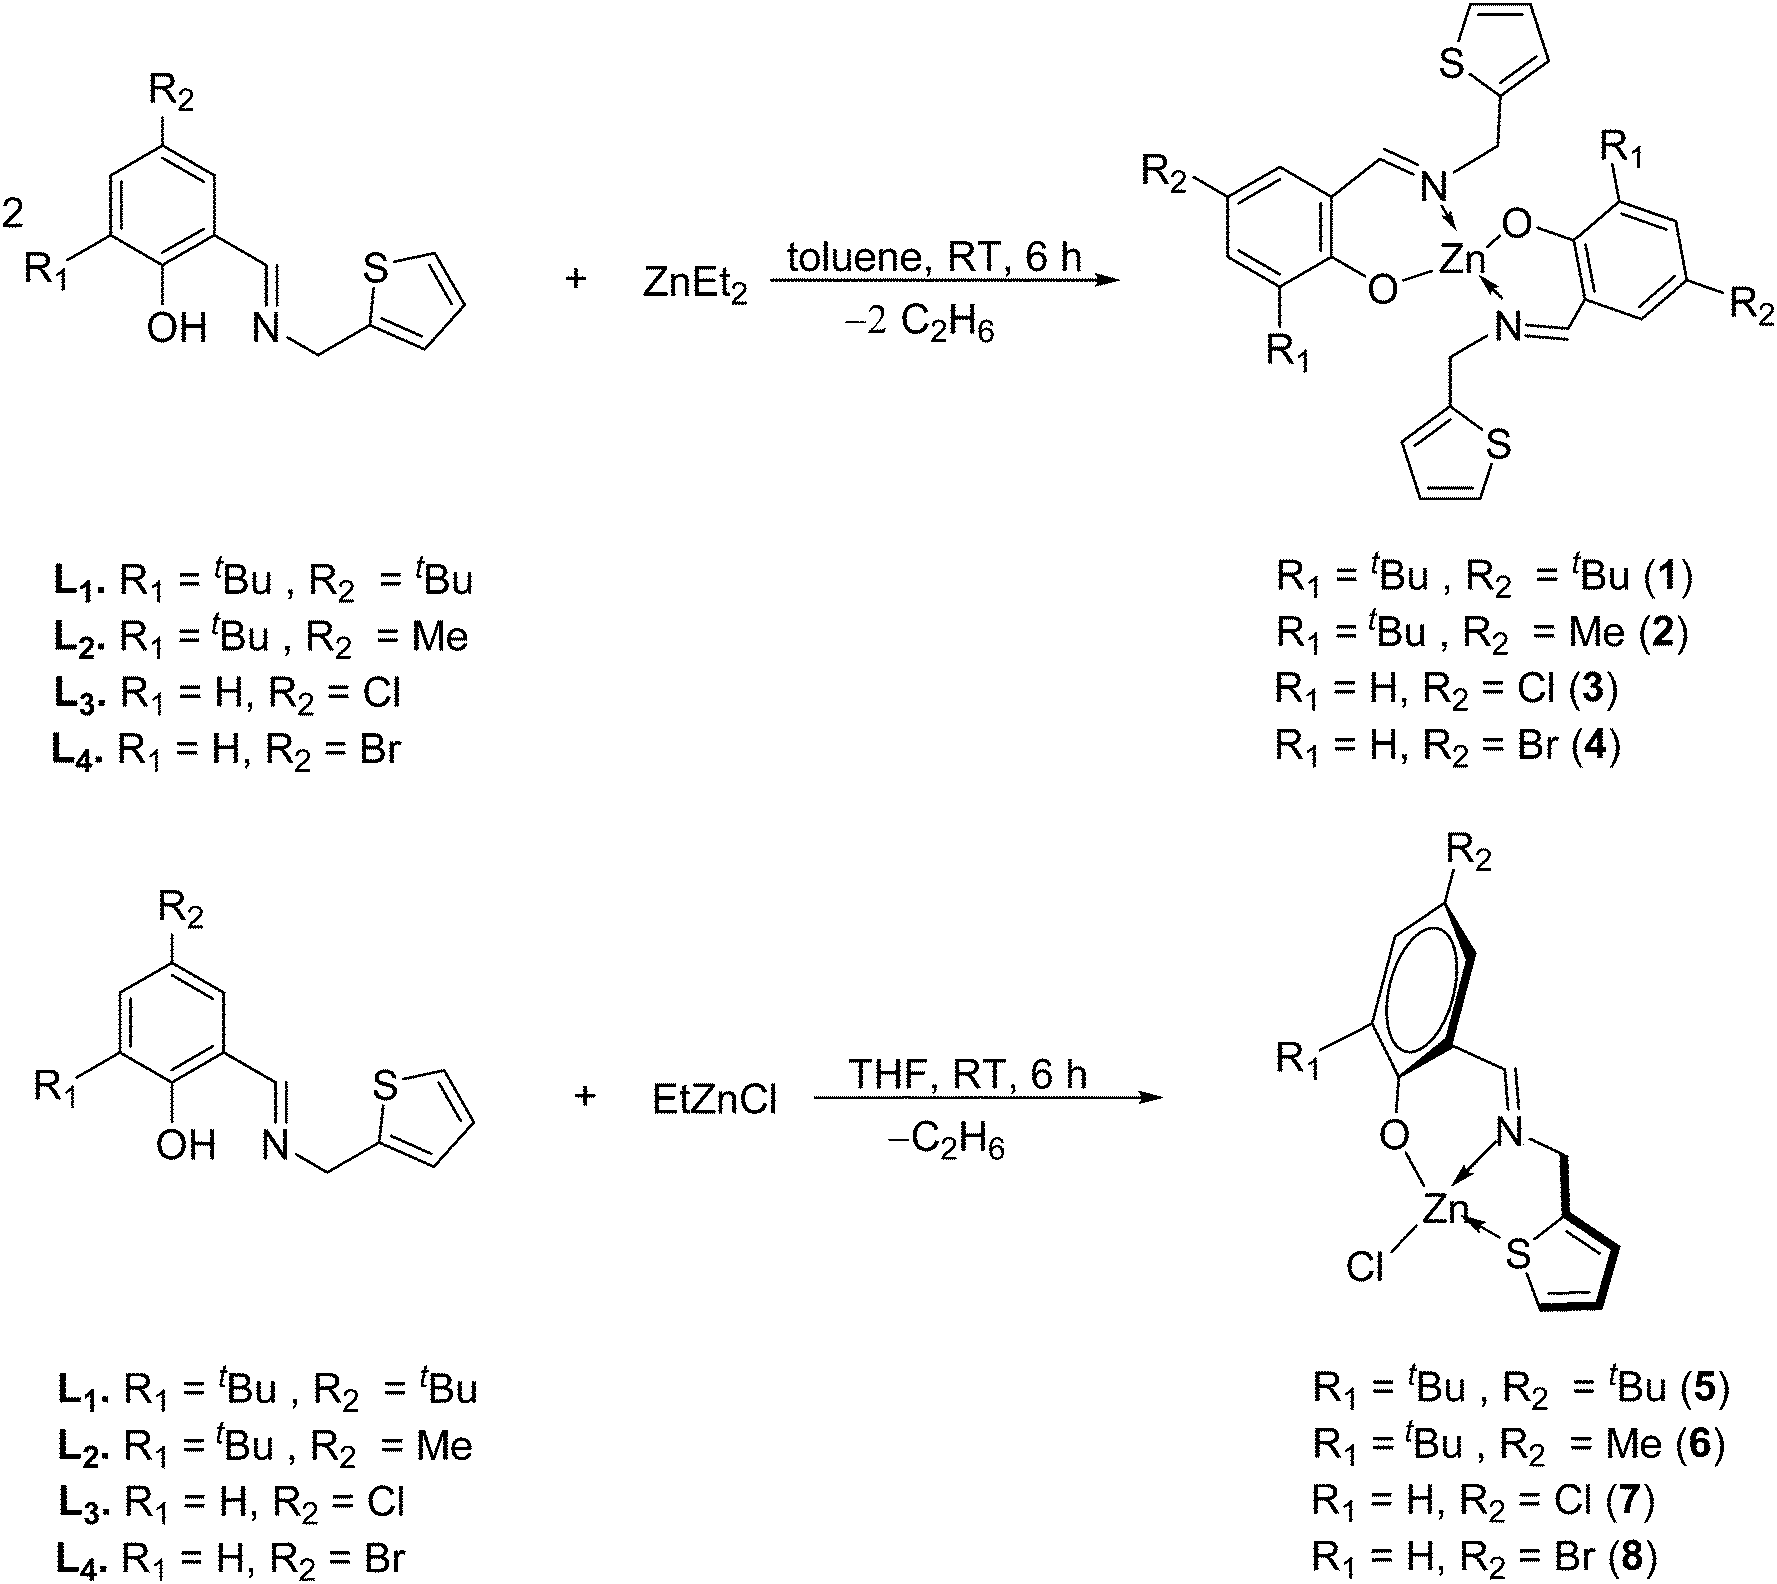 Mononuclear Zn( ii ) compounds supported by iminophenolate 